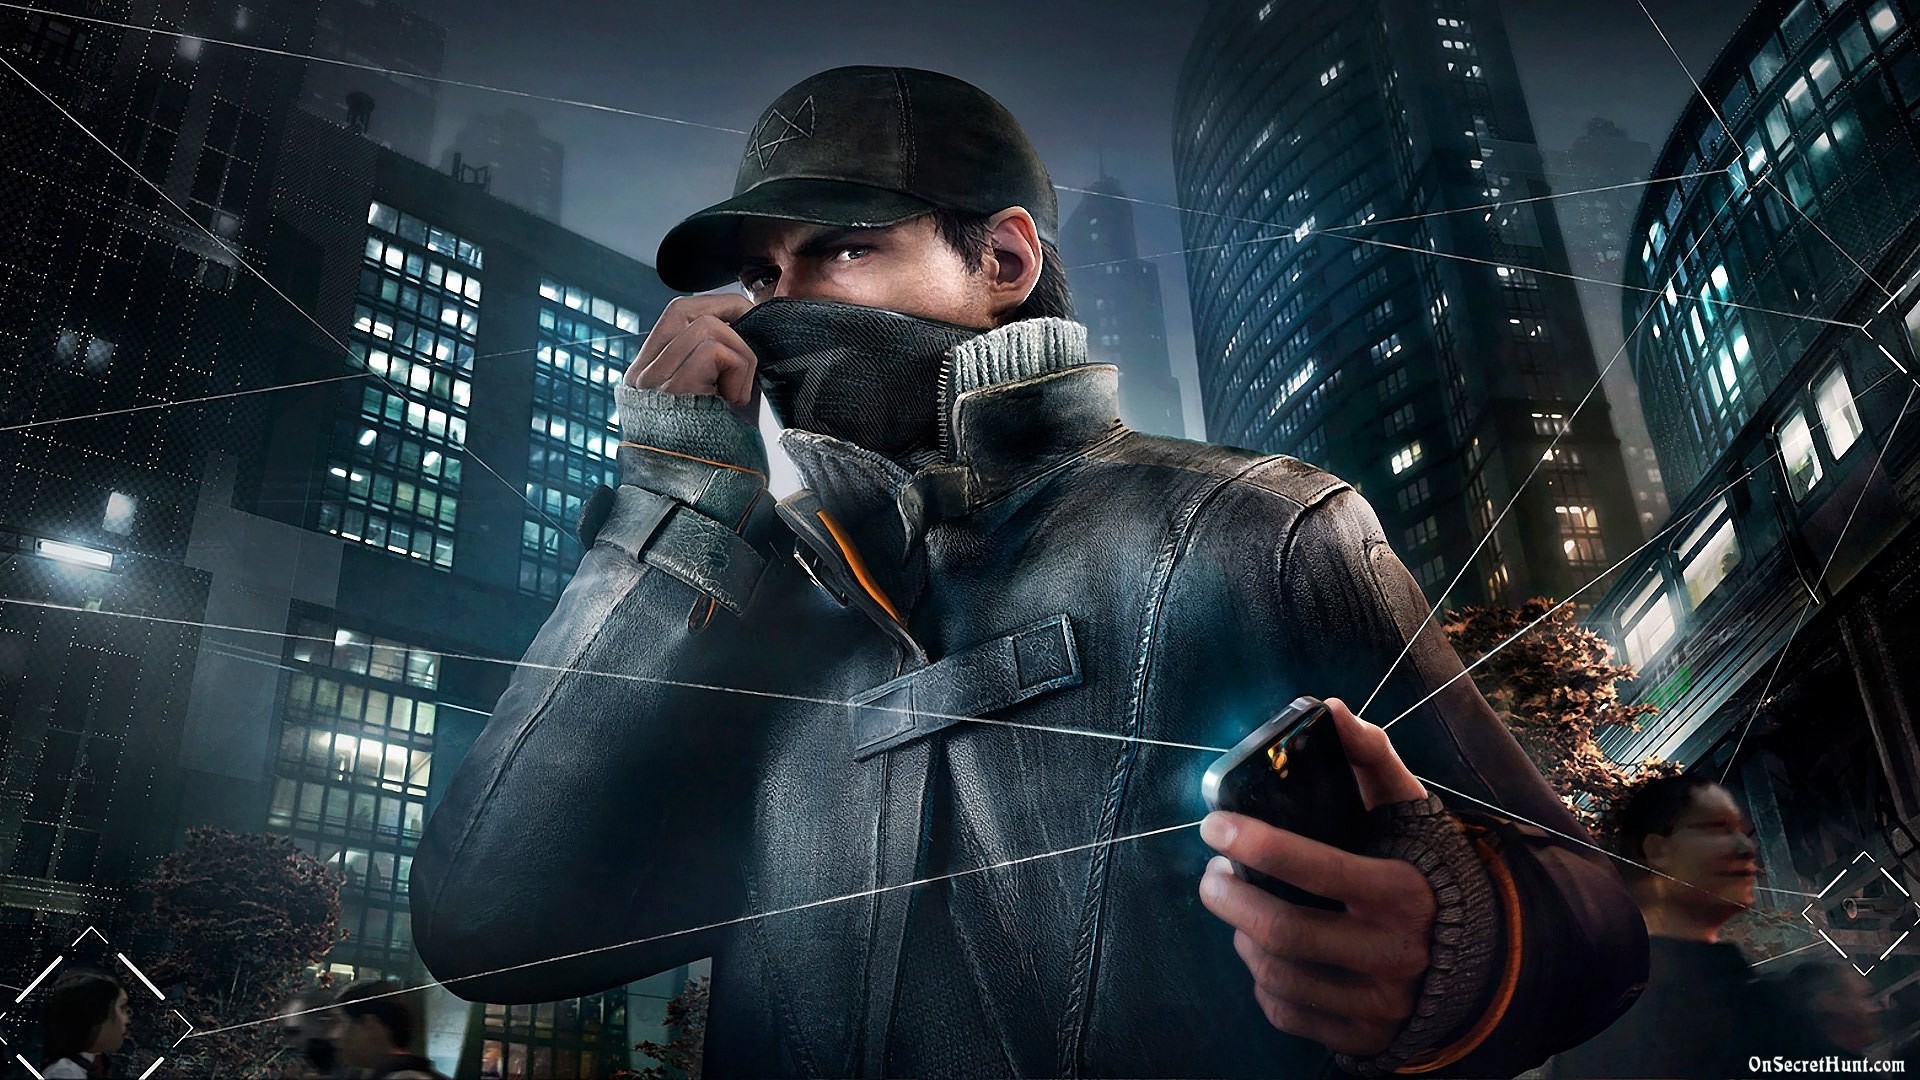 1920x1080 Watch Dogs Pc Cover. Video Game - Watch Dogs Wallpaper